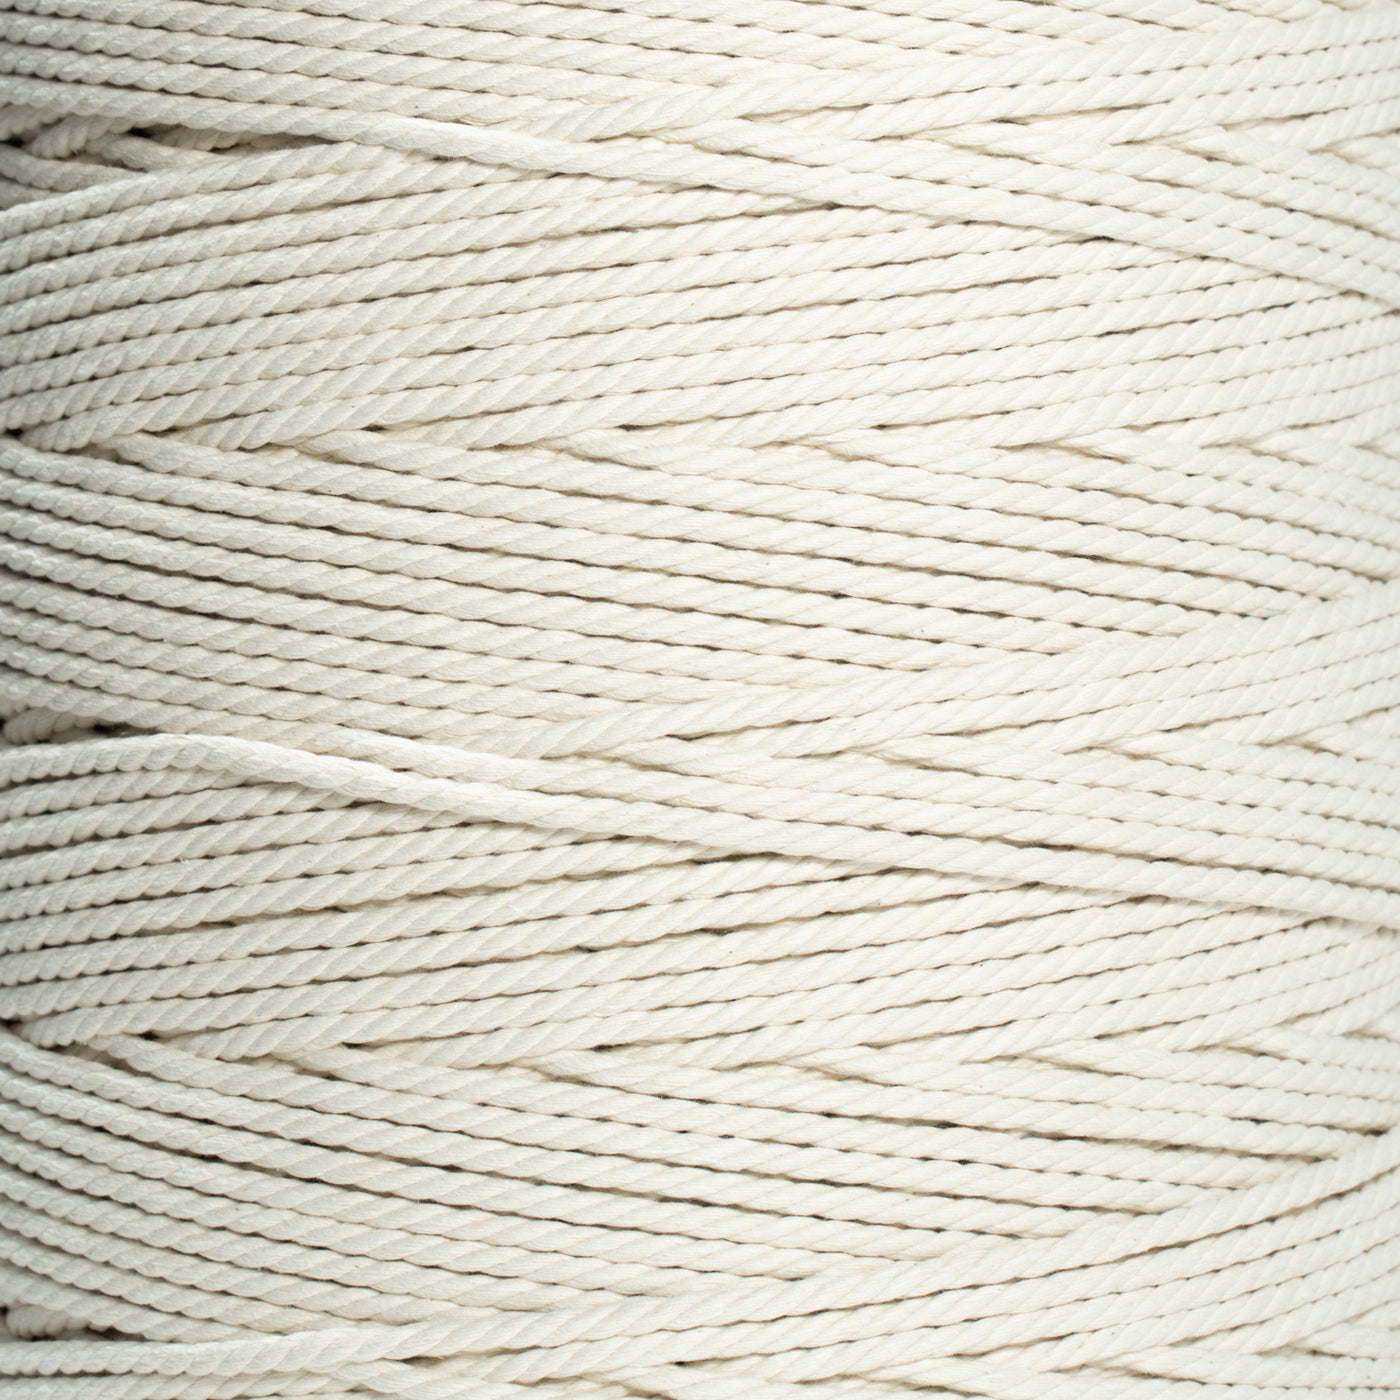 MACRAME COTTON ROPE 5 MM - 3 PLY - NATURAL COLOR – GANXXET